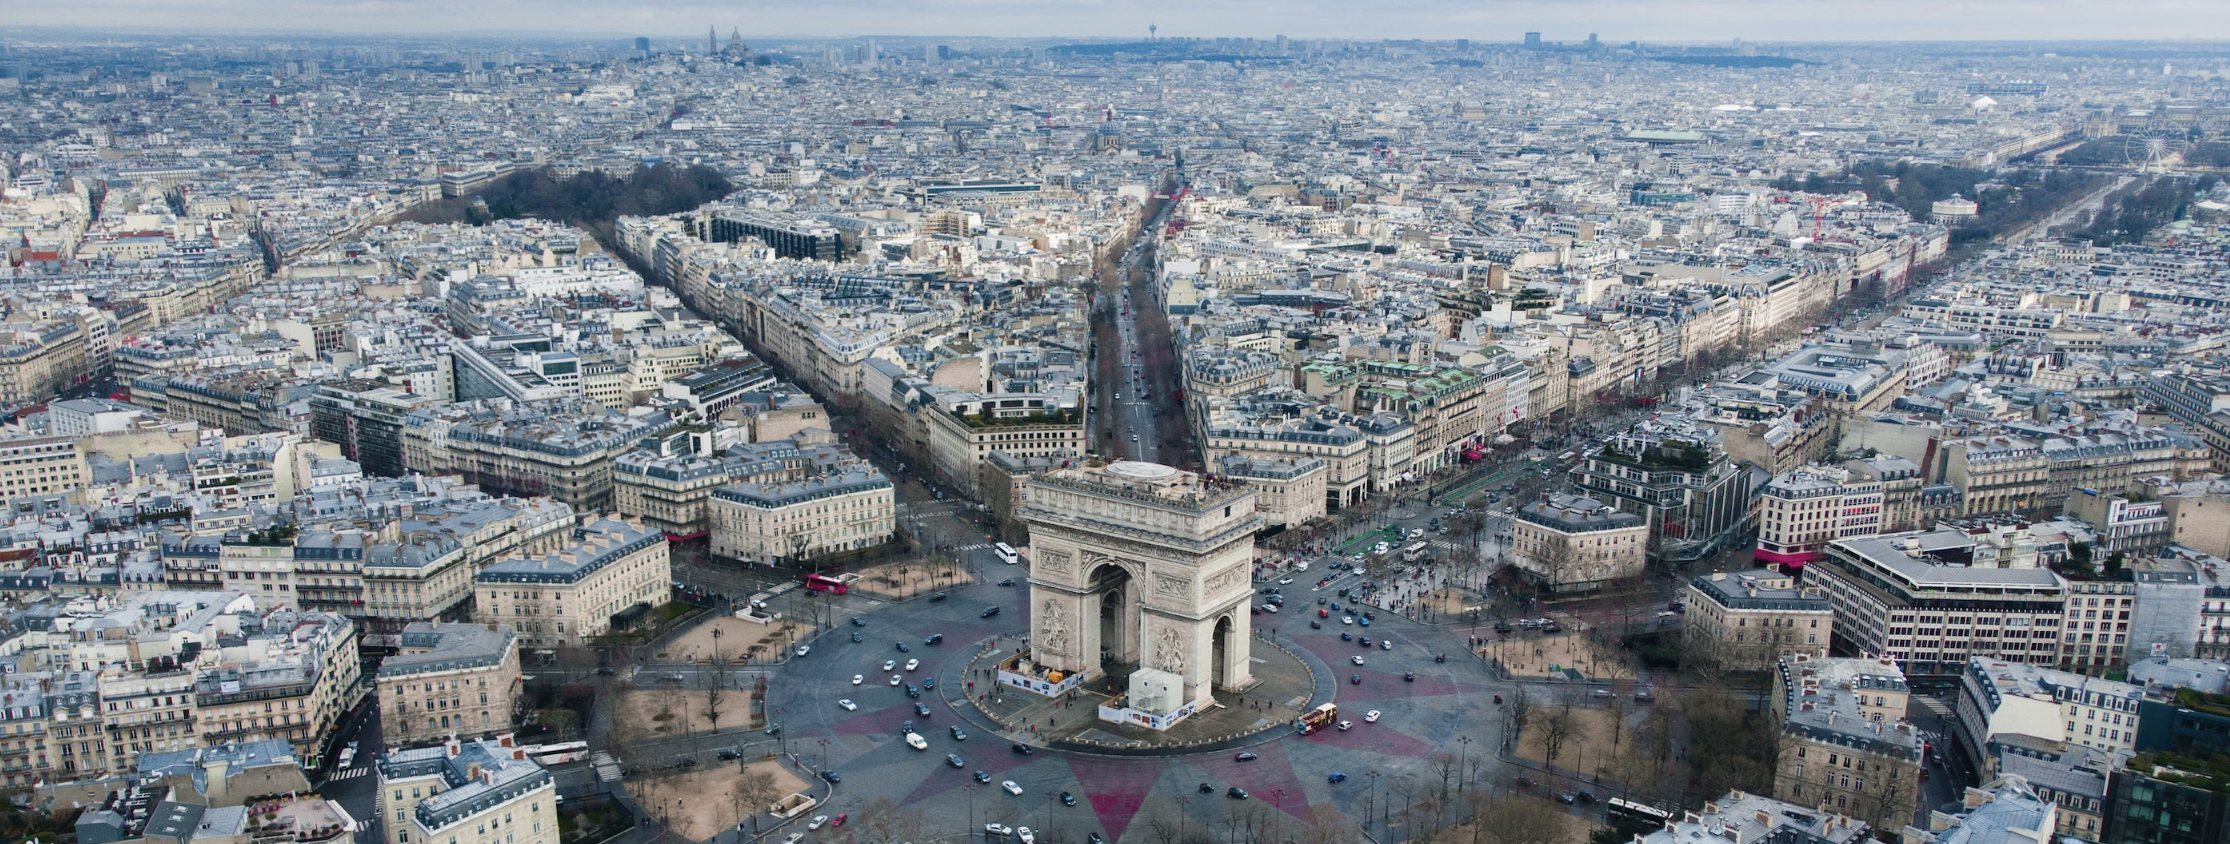 Study: 64% of single family offices in France are private equity investors